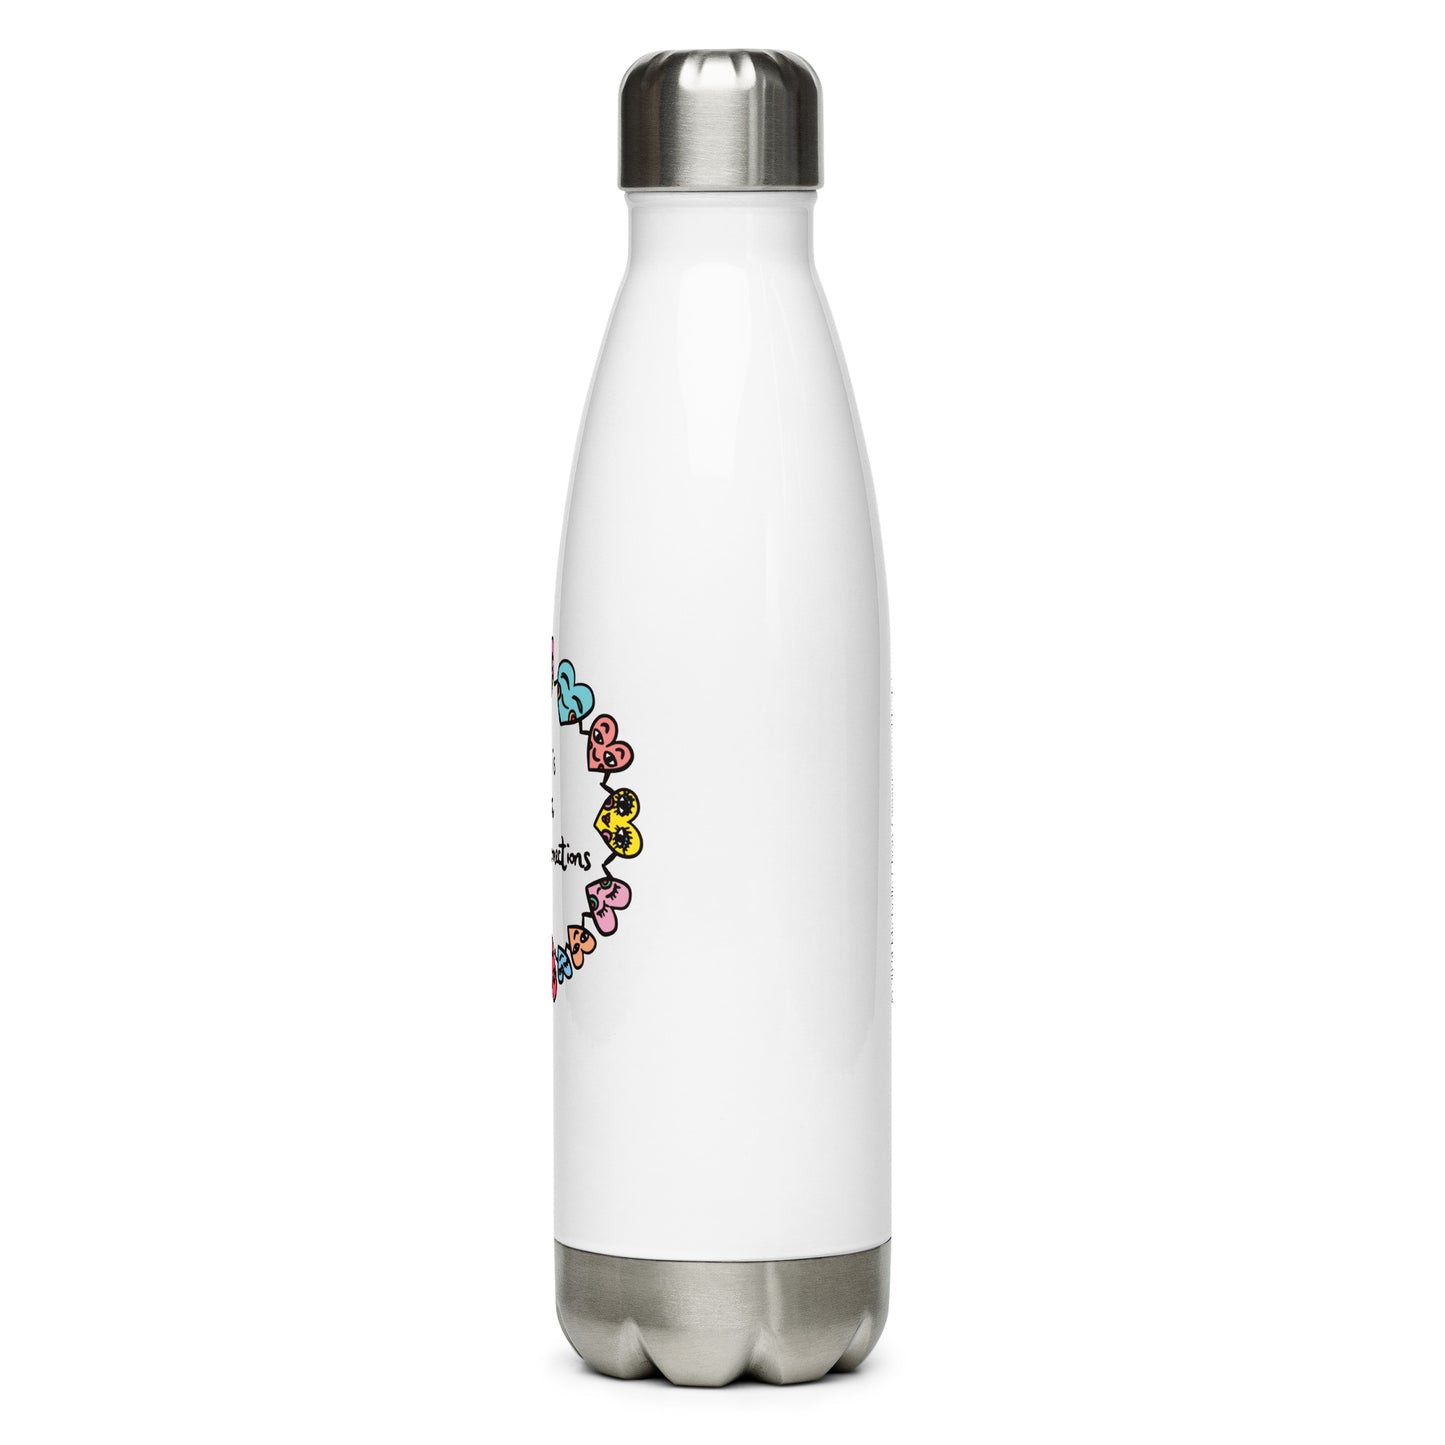 "Life is about Love & Connections" Stainless Steel Water Bottle